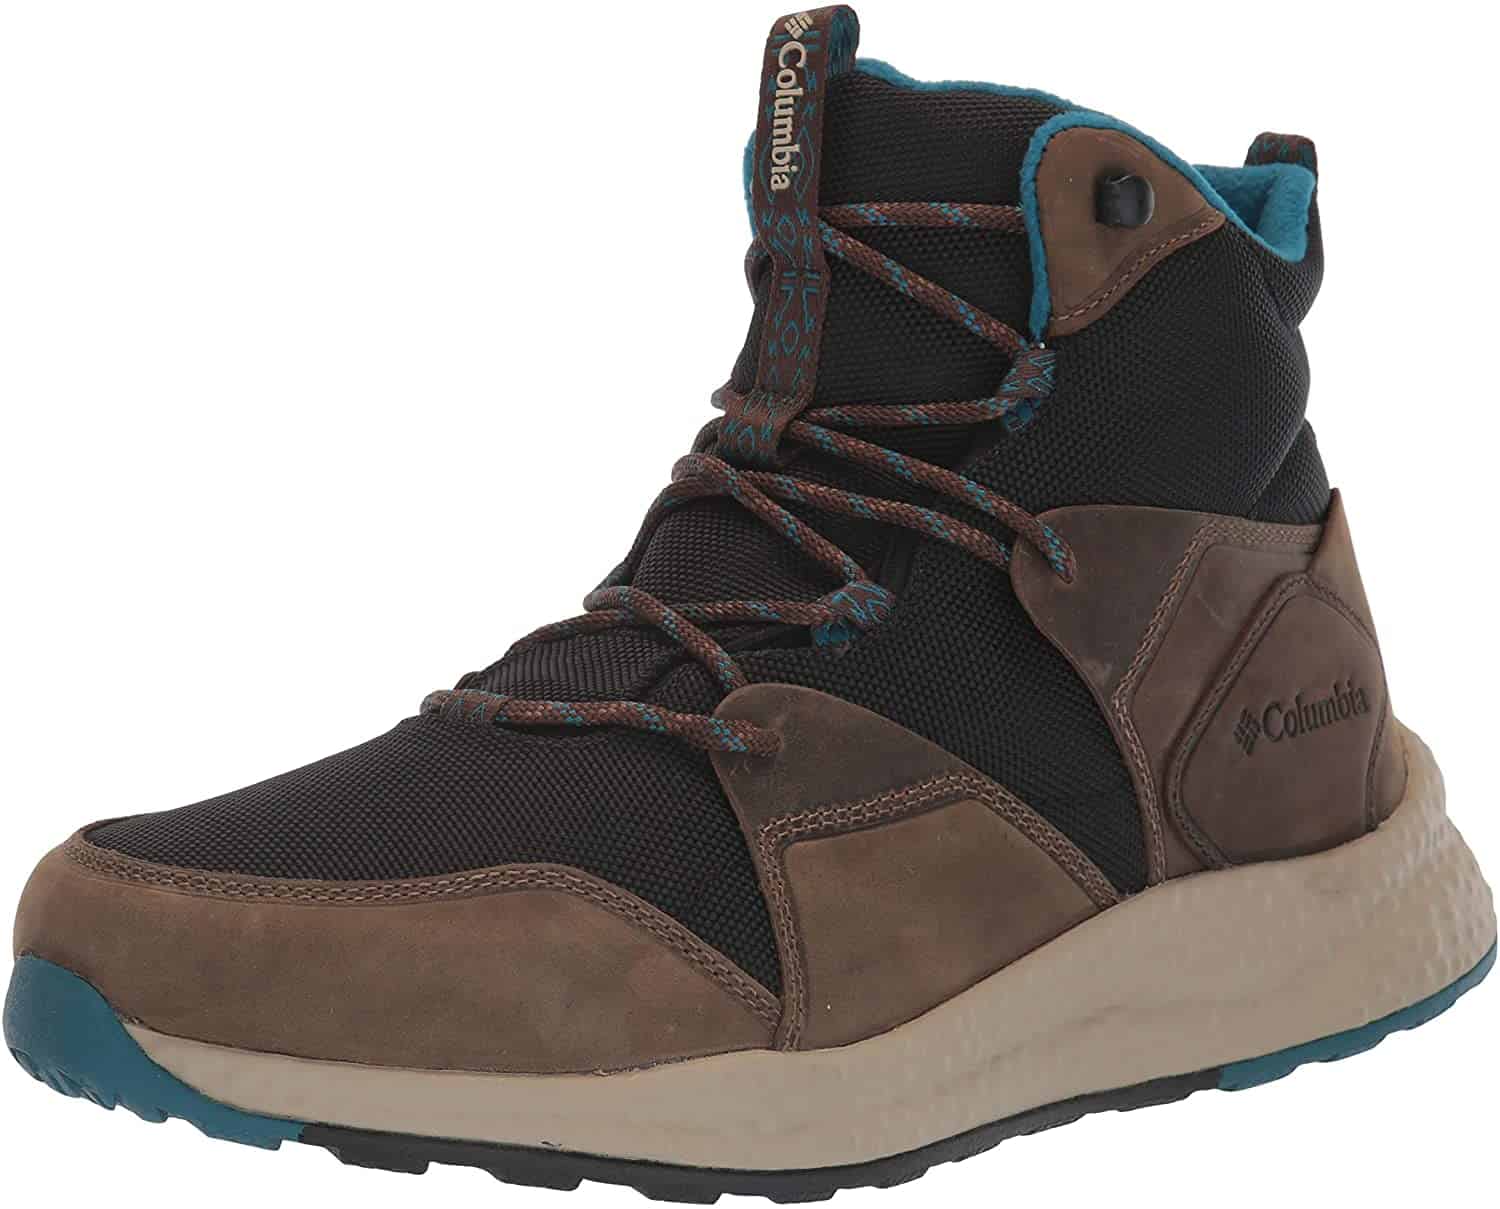 Columbia Men's ShFt Outdry Boot Snow